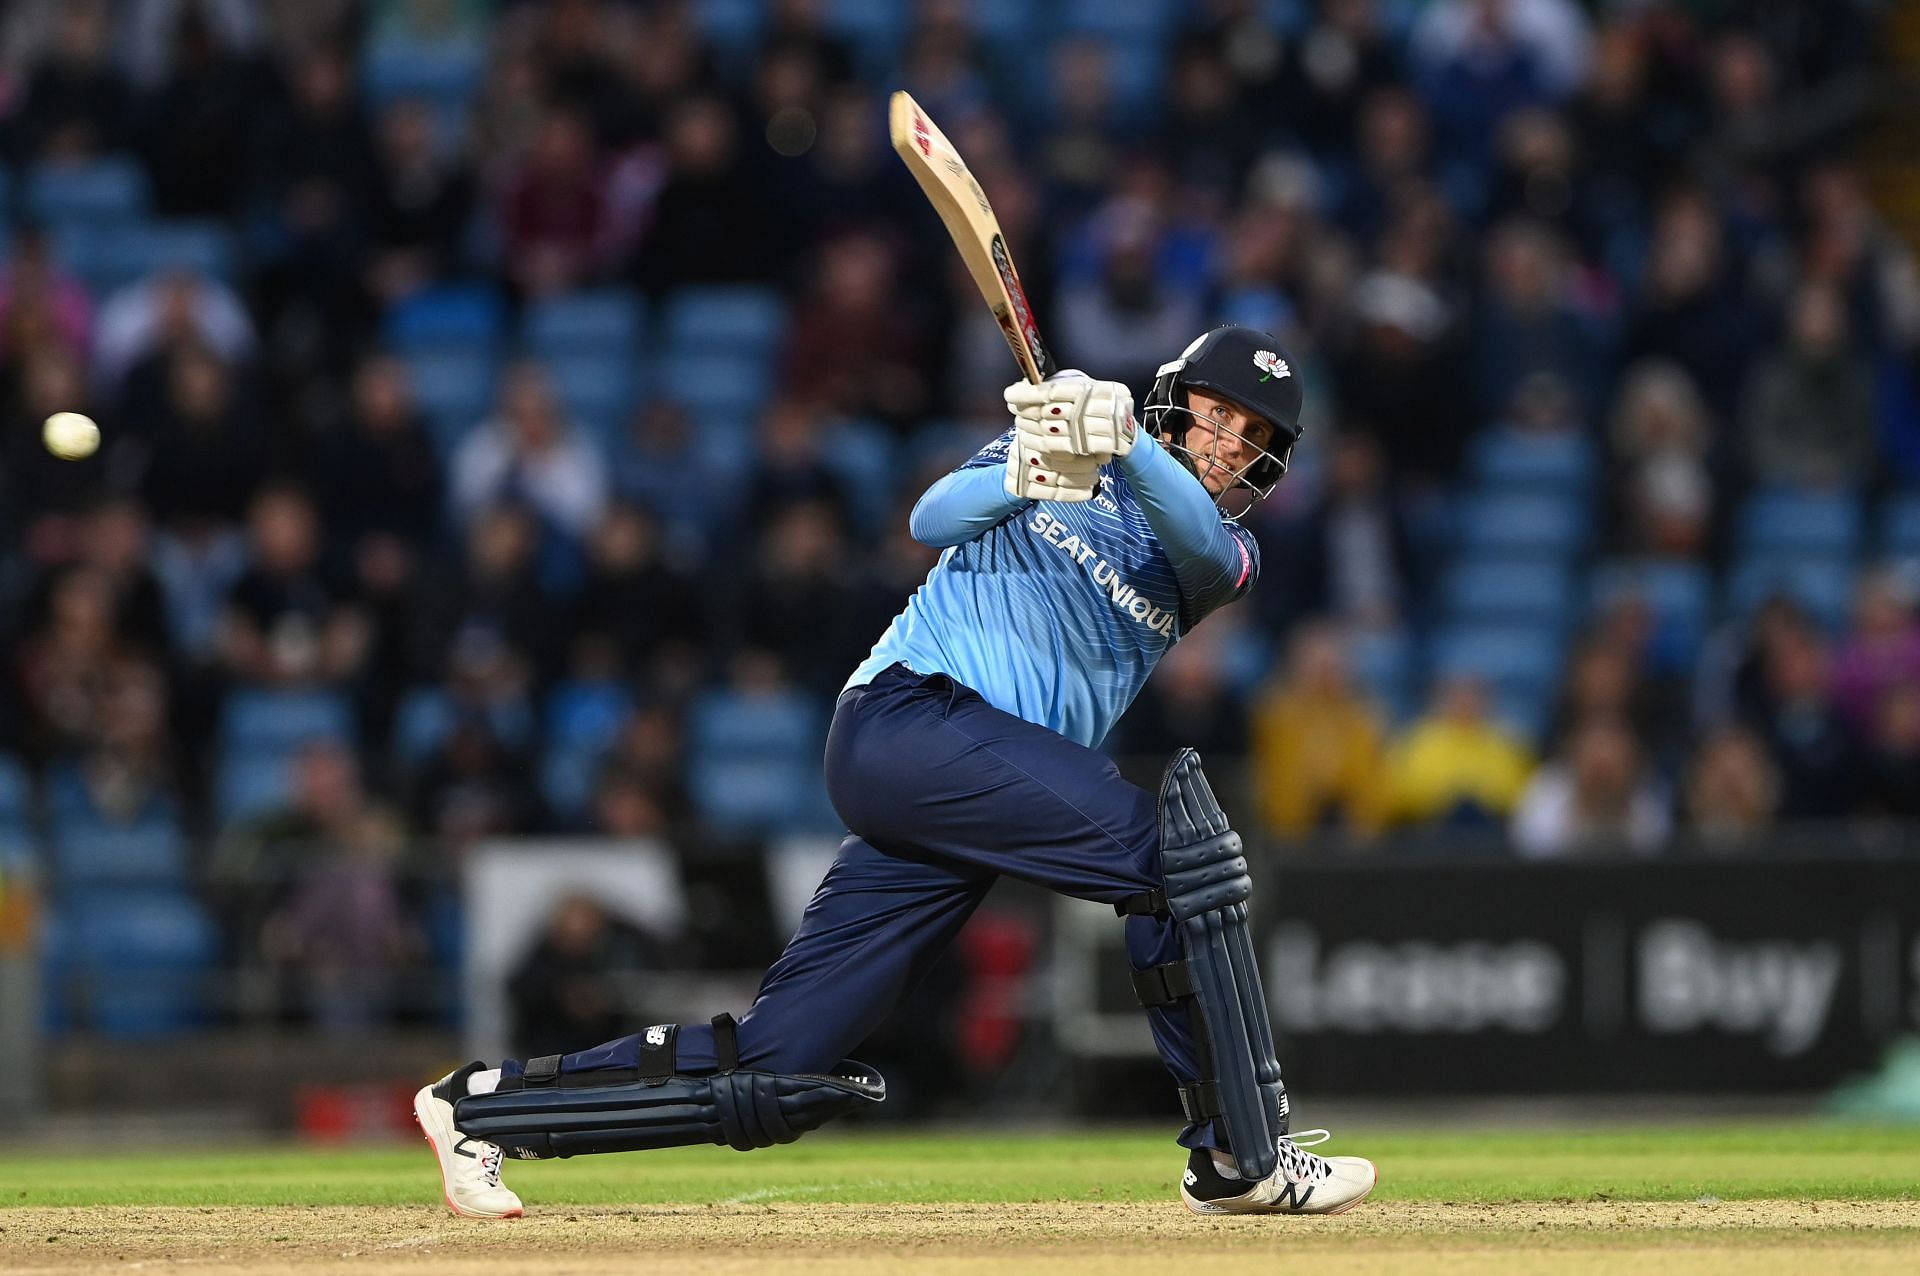 Joe Root in the Vitality T20 Blast. Pic: Getty Images